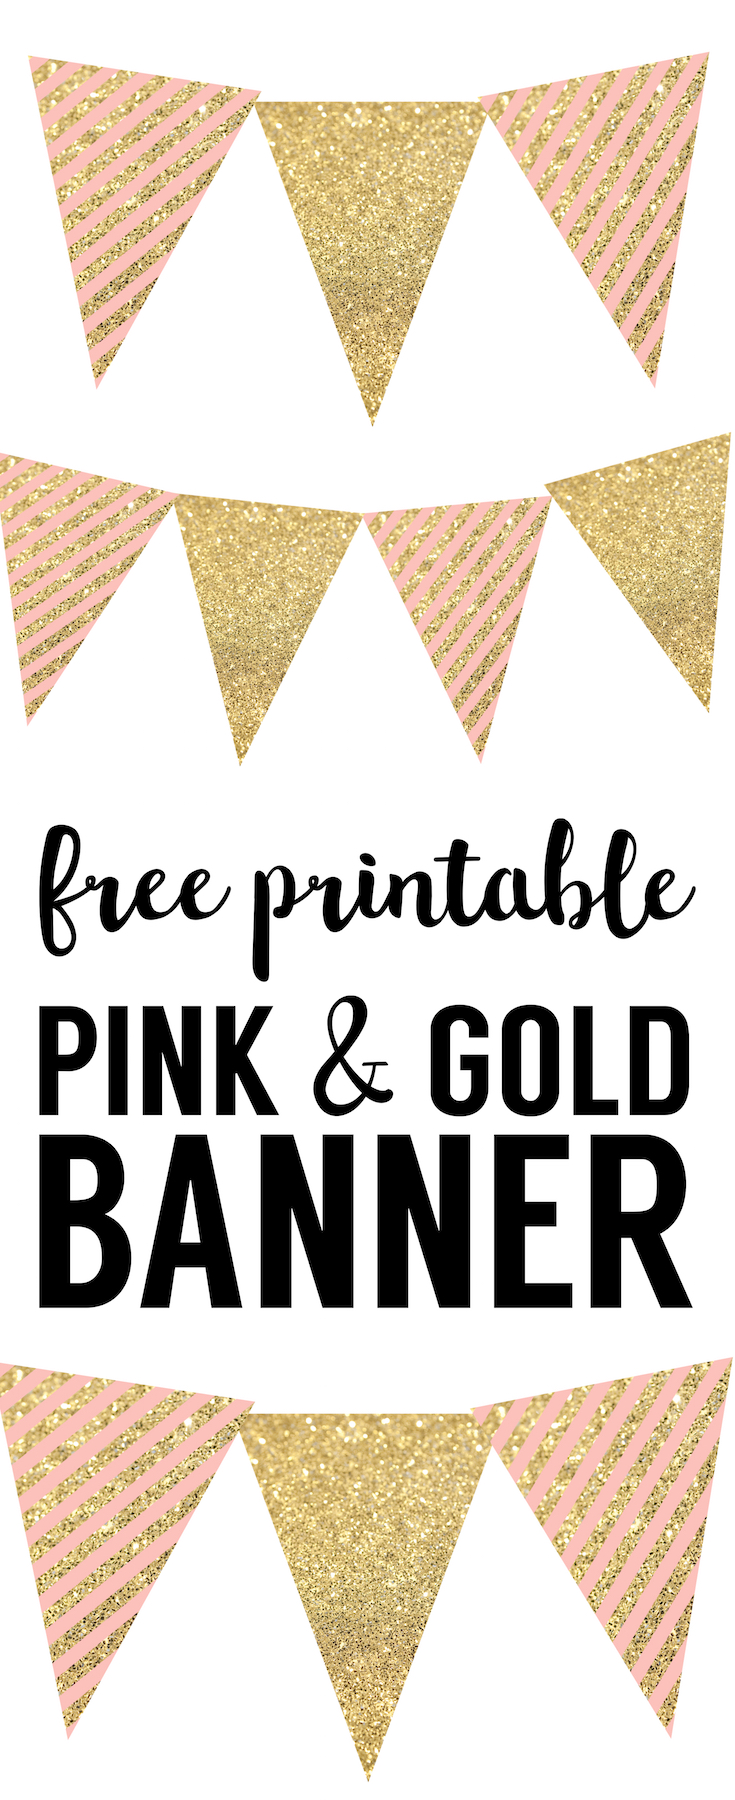 Pink and Gold Banner Free Printable: Print this banner for your 1st birthday, baby shower, birthday party, or bridal shower or wedding. Easy DIY decorations for a pink and gold party.